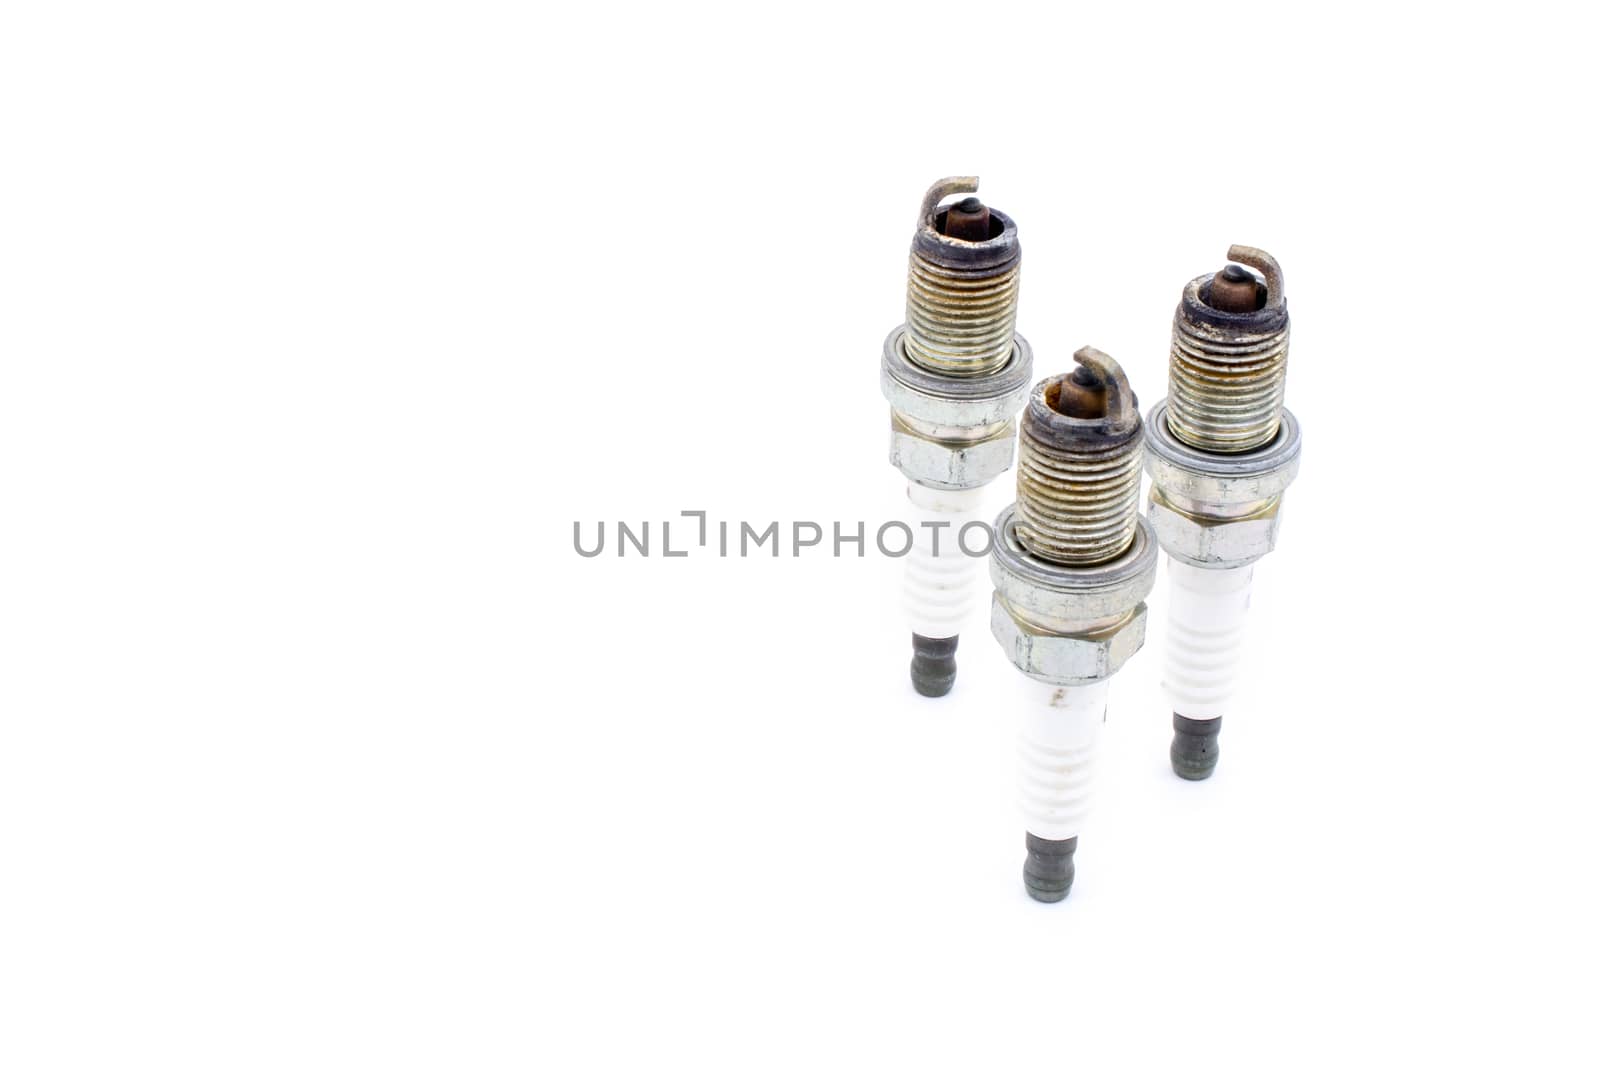 Old spark plug isolated on the white by ahimaone